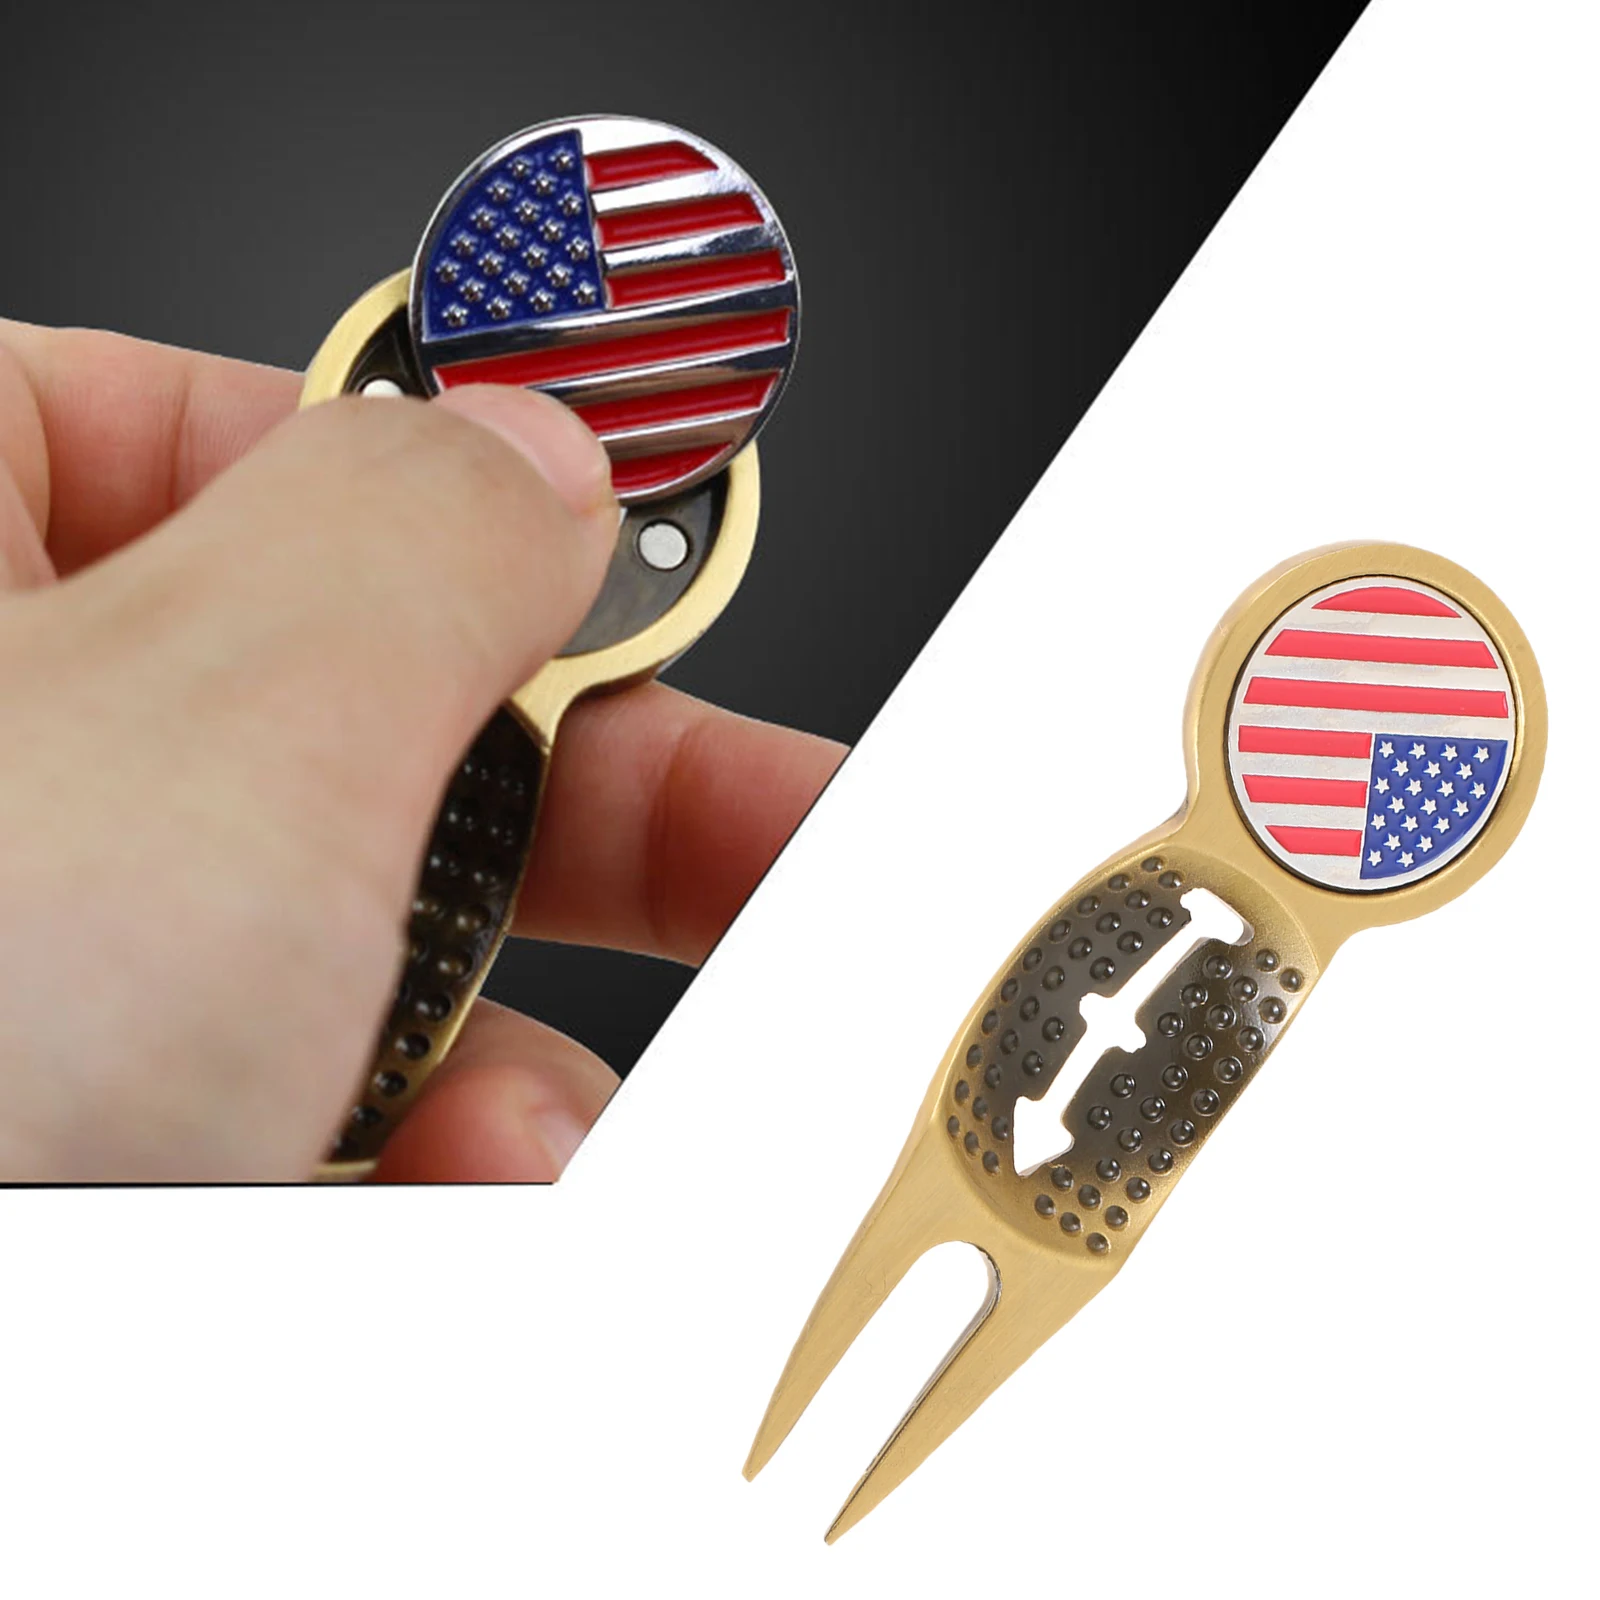 

1 Pc Golf Divot Tool American Flag Pattern Metal 8.8x2.9cm Repair Green Ball Marks with Removable Ball Marker Golf Training Aids